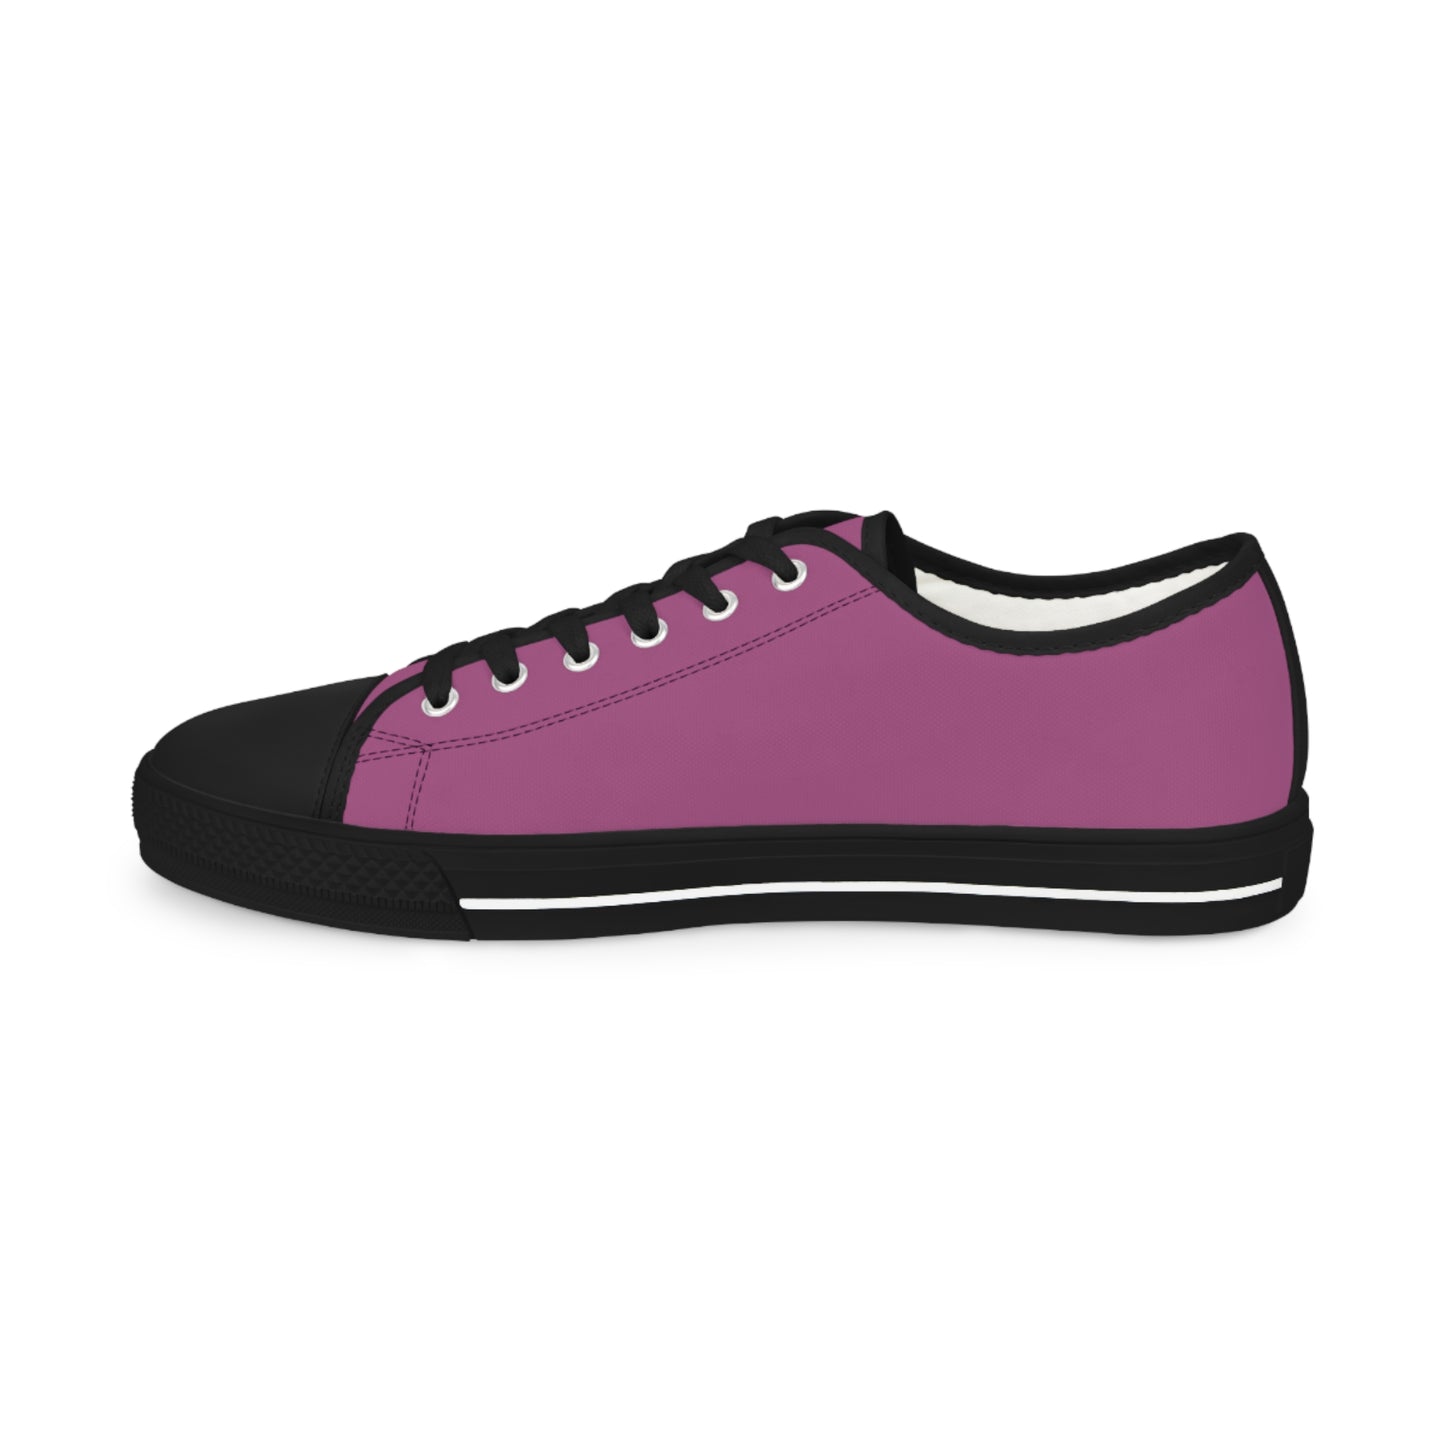 Men's Canvas Low Top Solid Color Sneakers - Candy Wrapper Pink US 14 Black sole